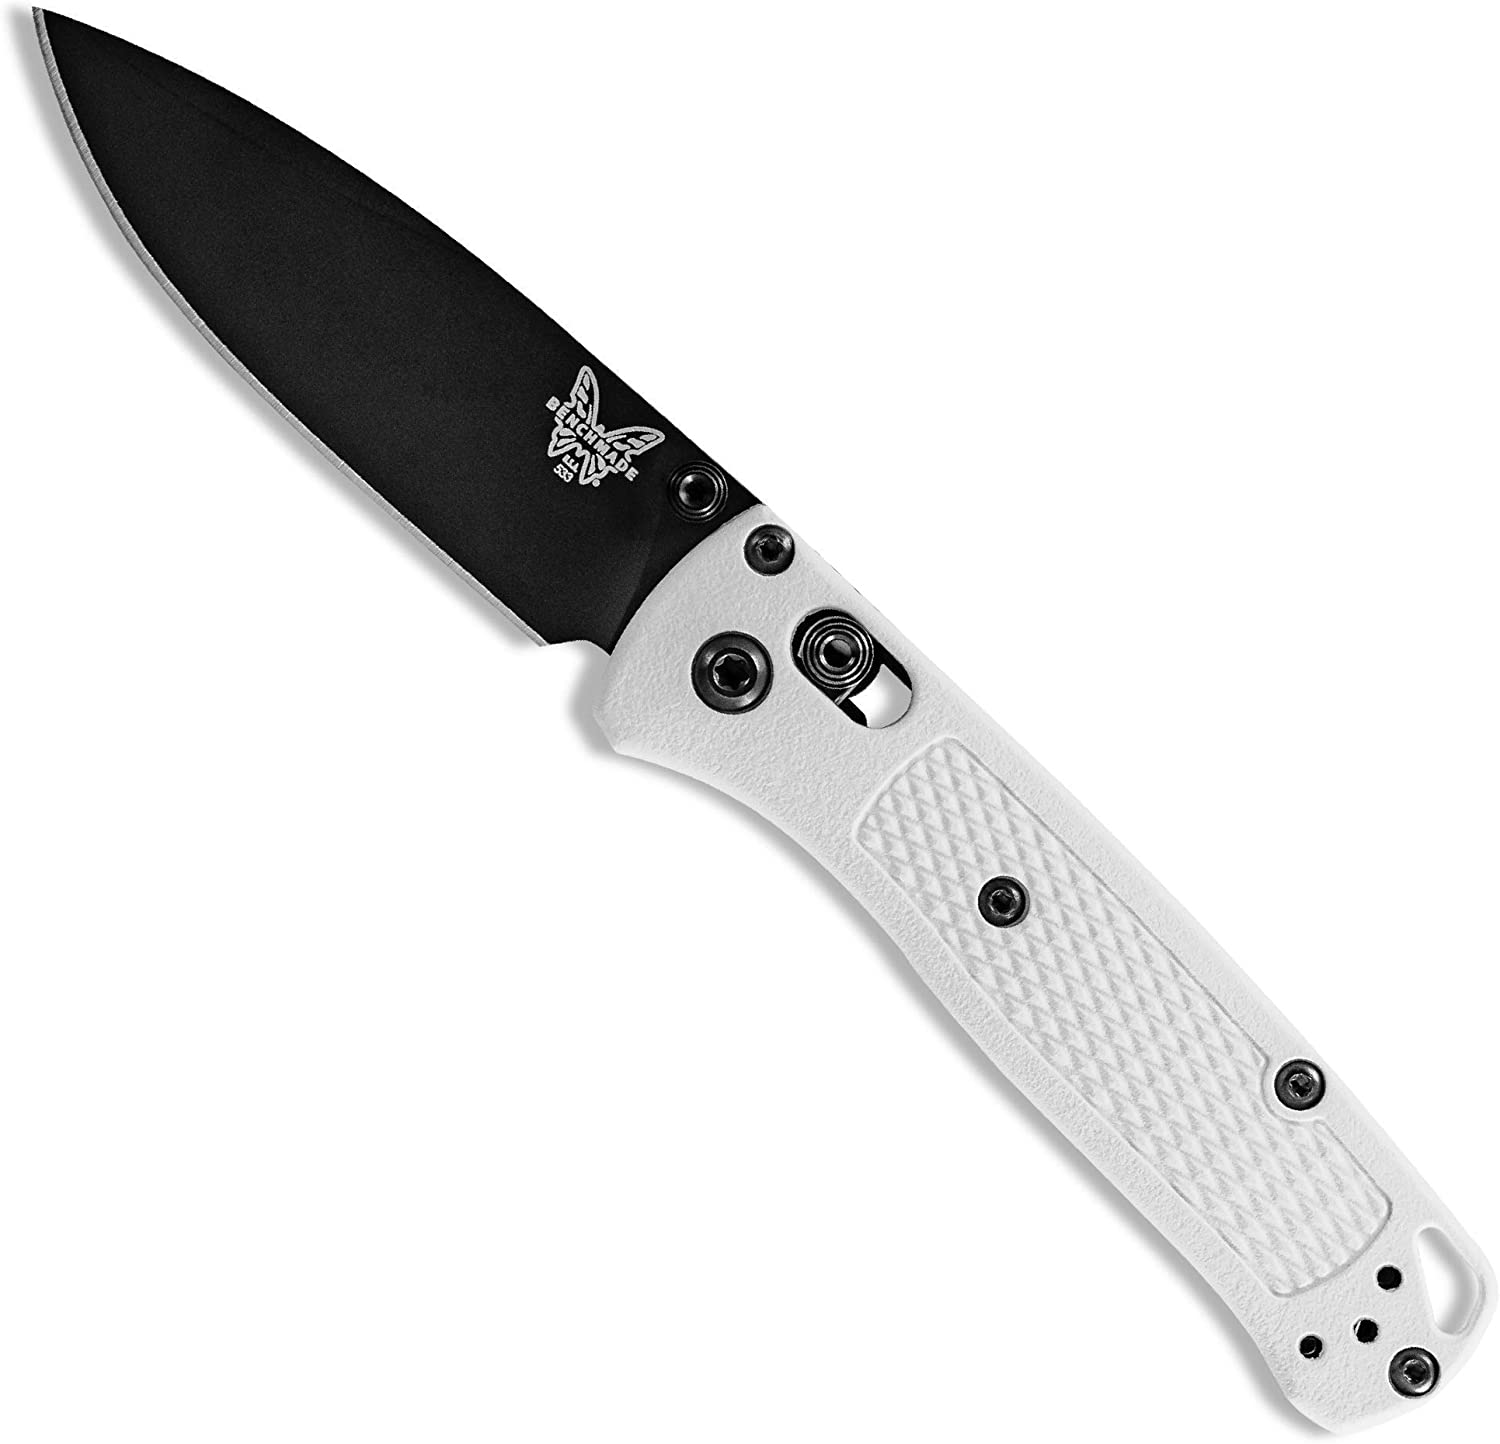 Benchmade – Mini Bugout 533 Knife, Drop-Point Blade, Made in The USA